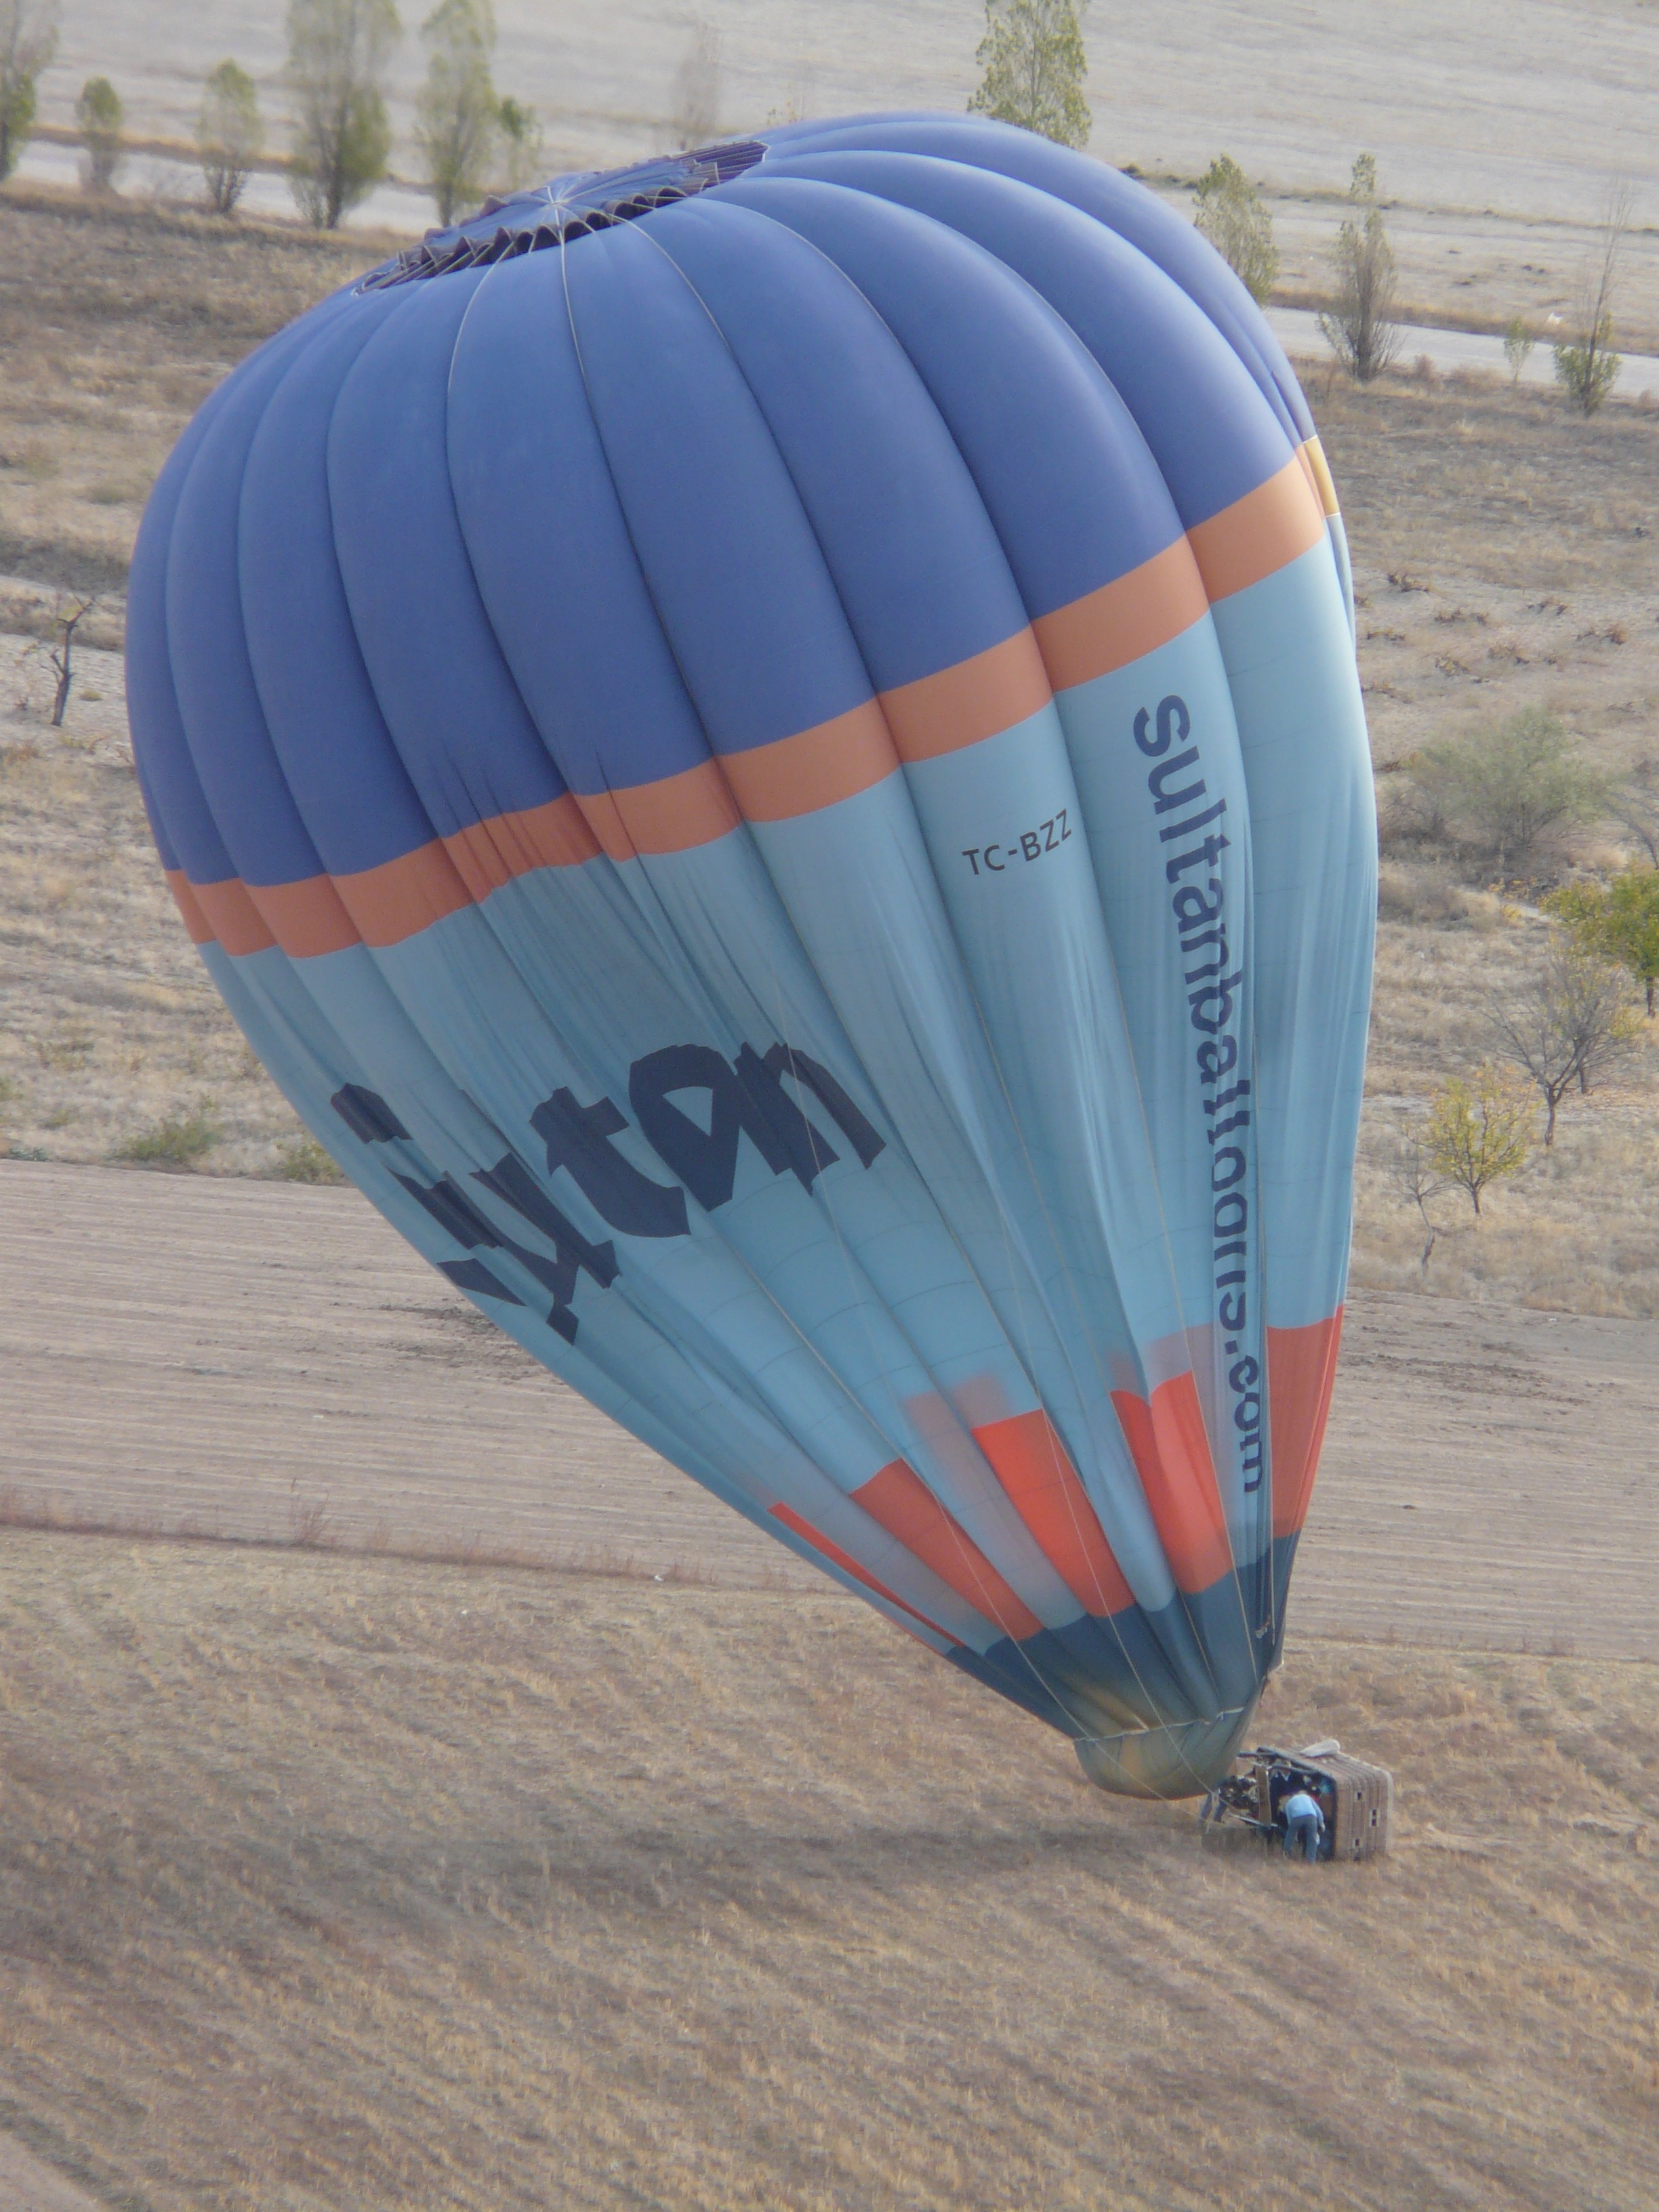 blue teal orange and red hot air balloon